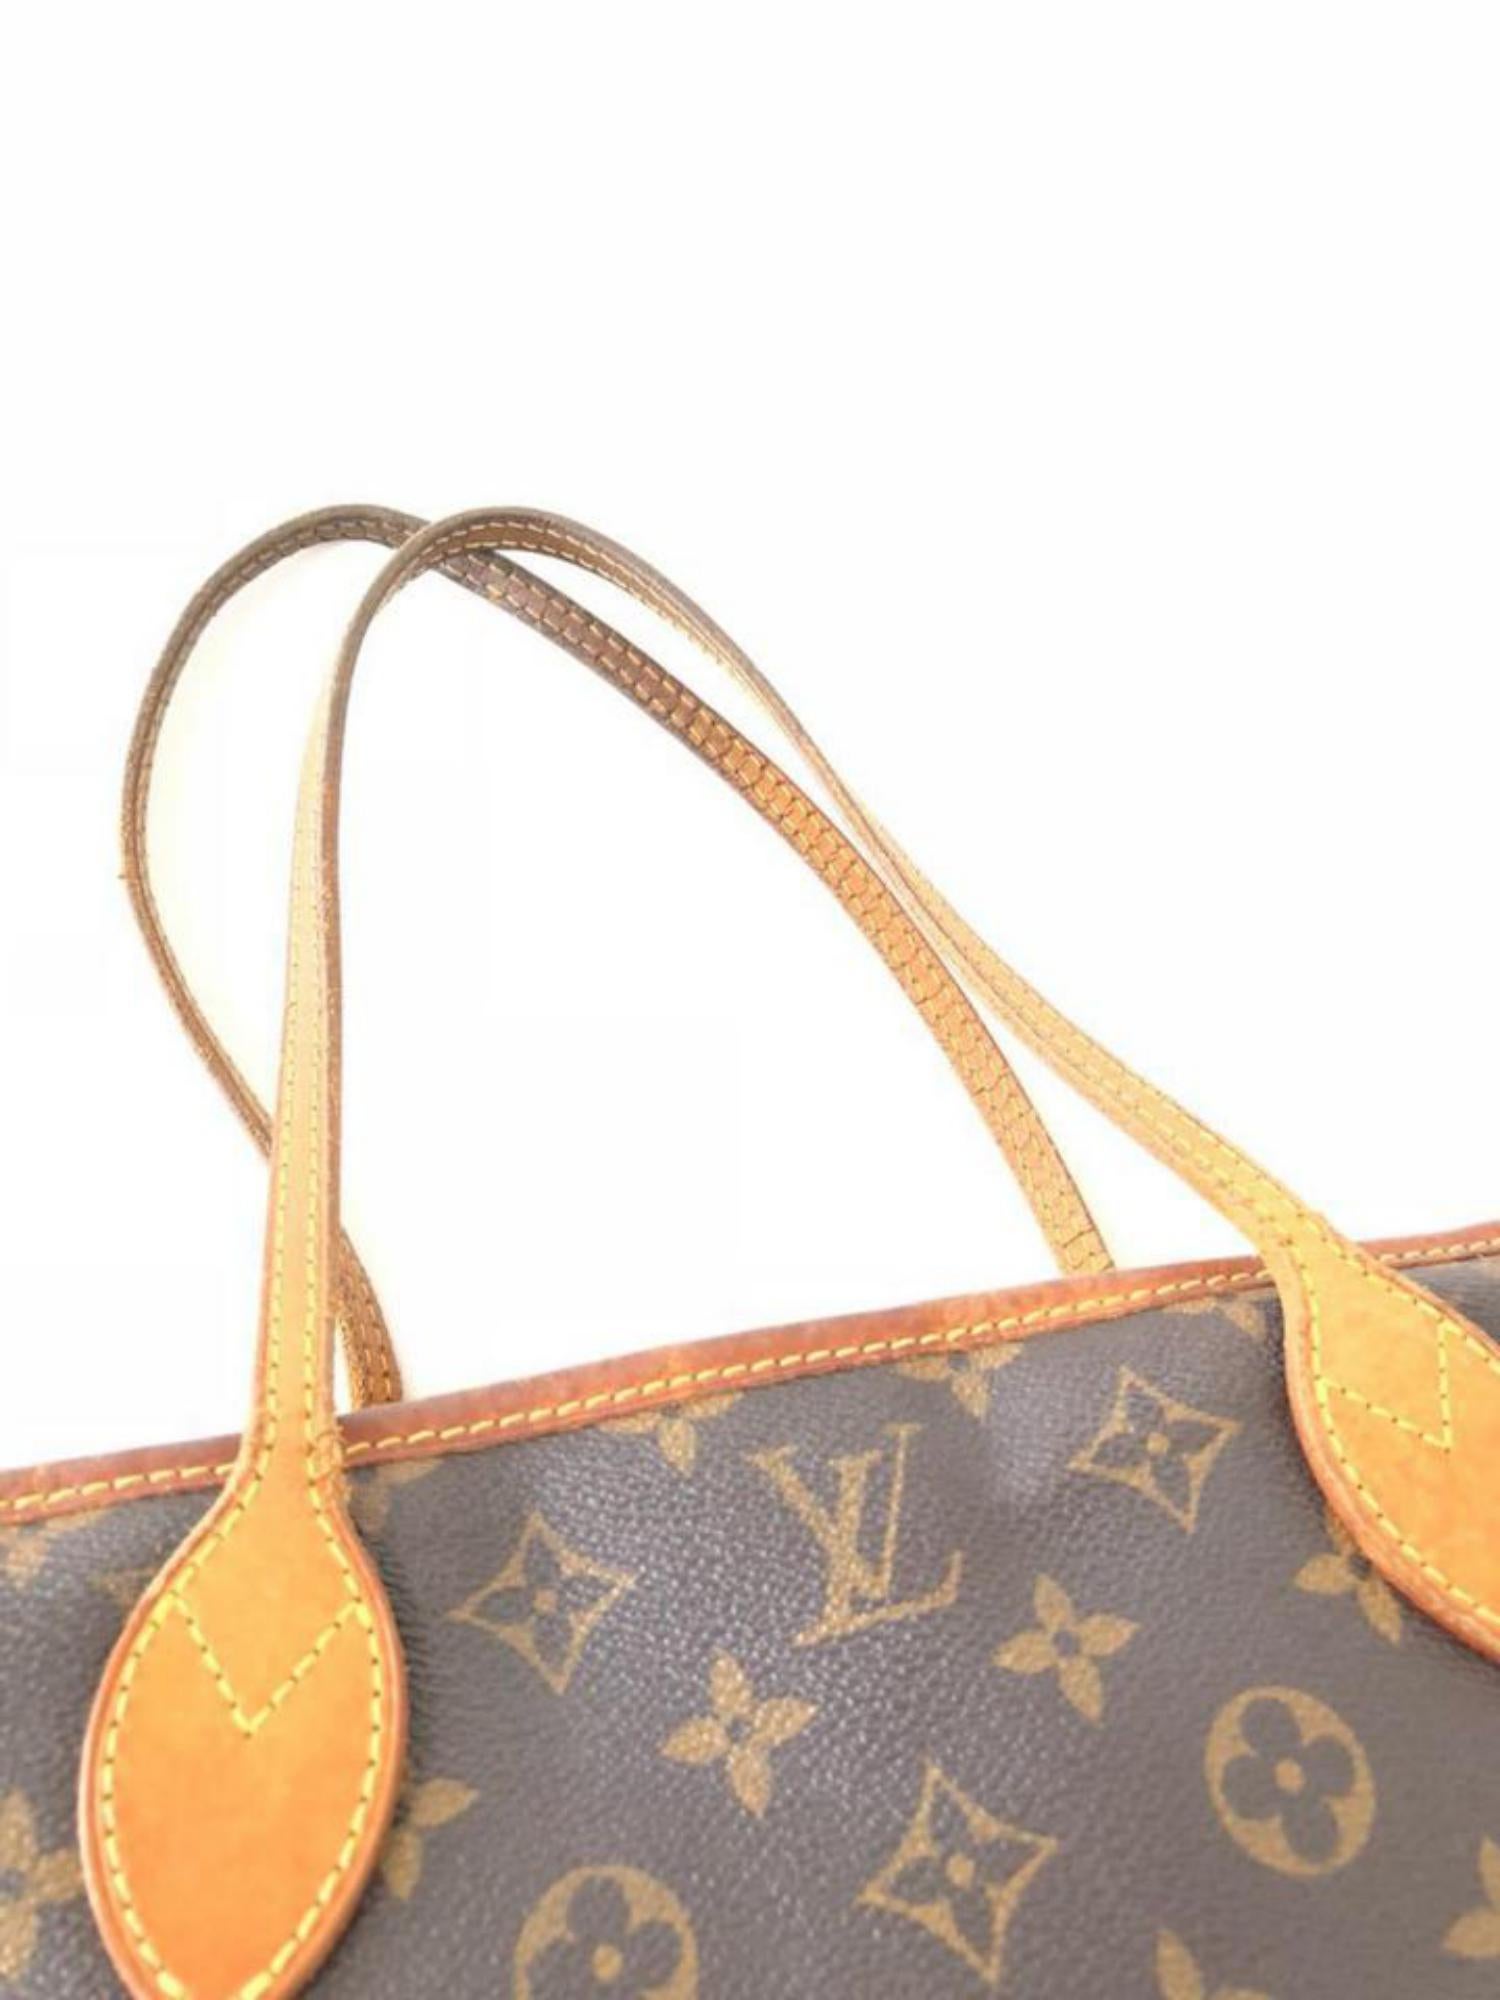 Louis Vuitton Neverfull Monogram Pm 231334 Brown Coated Canvas Tote For Sale 6